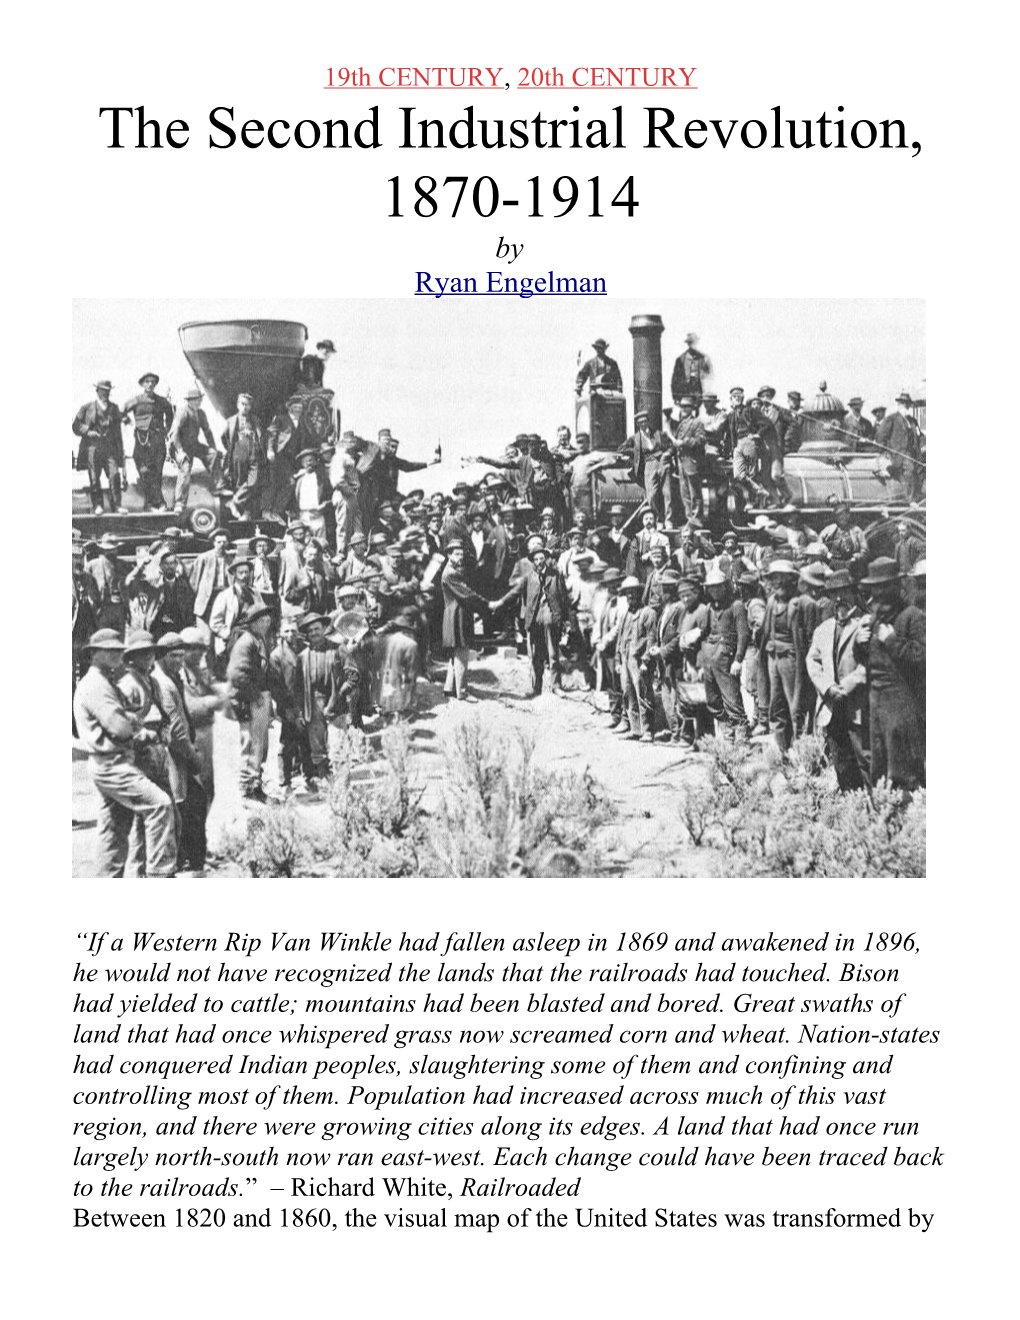 The Second Industrial Revolution, 1870-1914